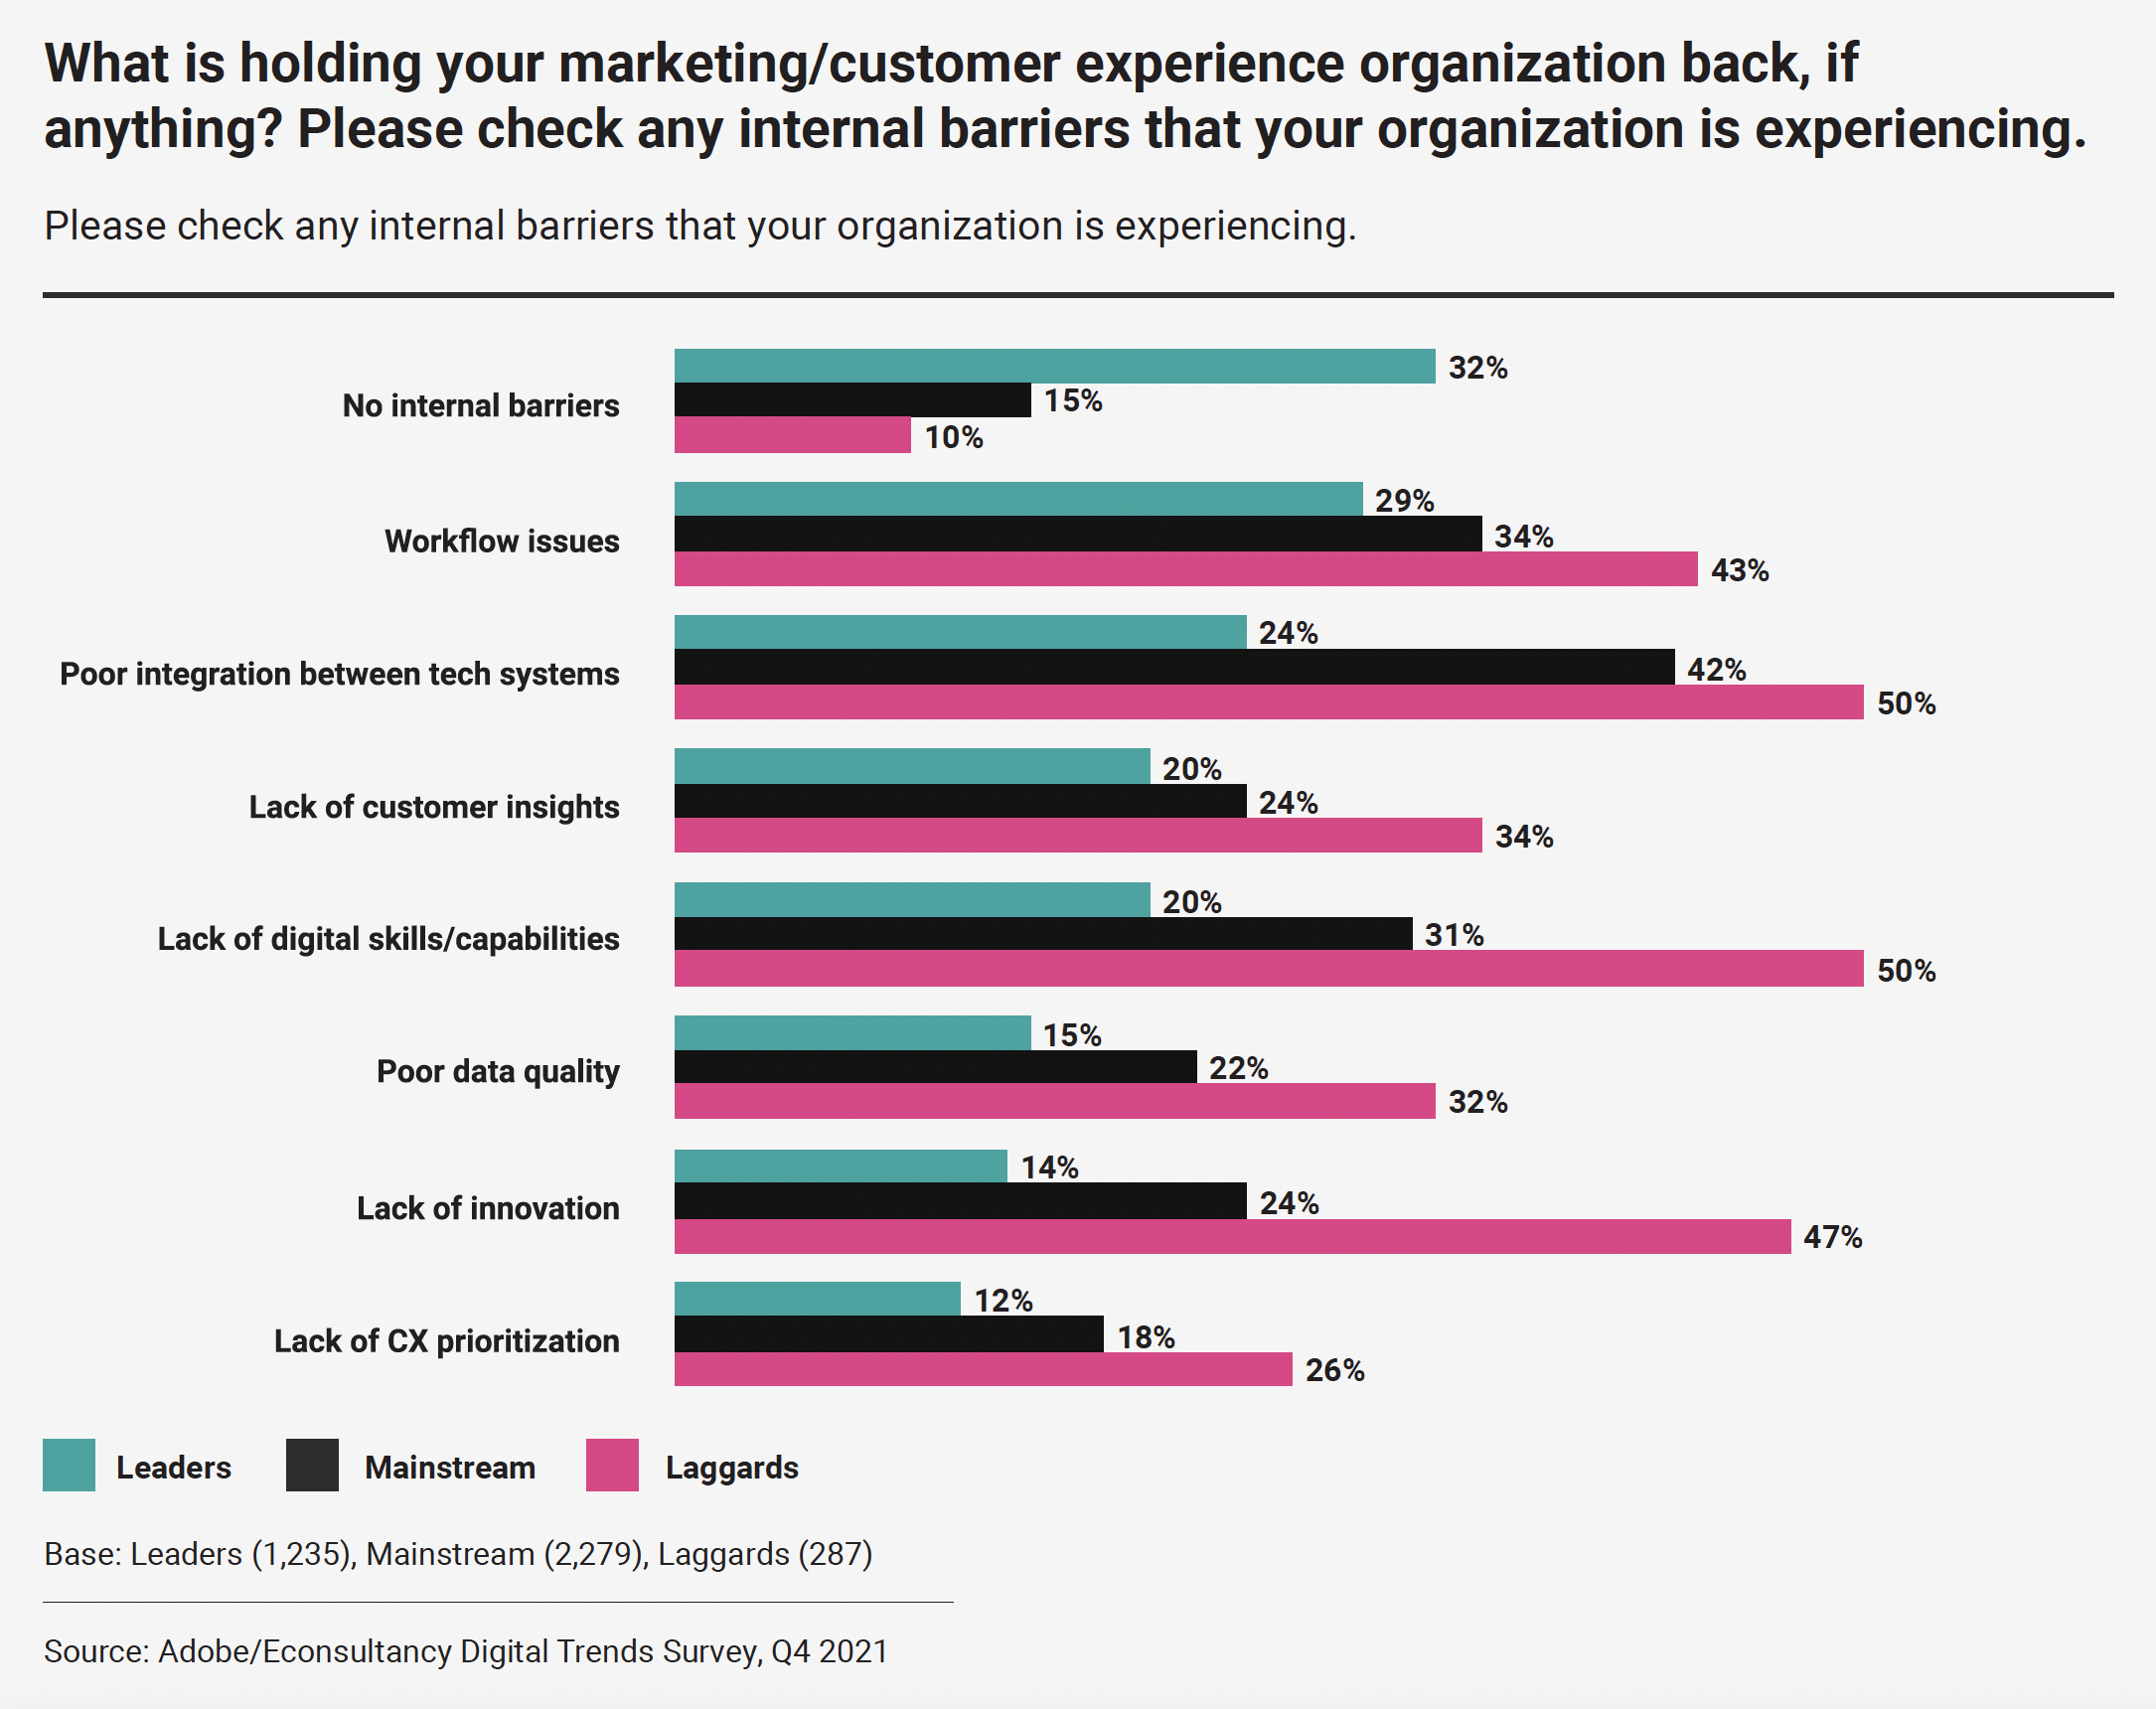 Bar graph from Adobe 2022 Digital Trends Report depicting internal barriers experienced by surveyed organizations